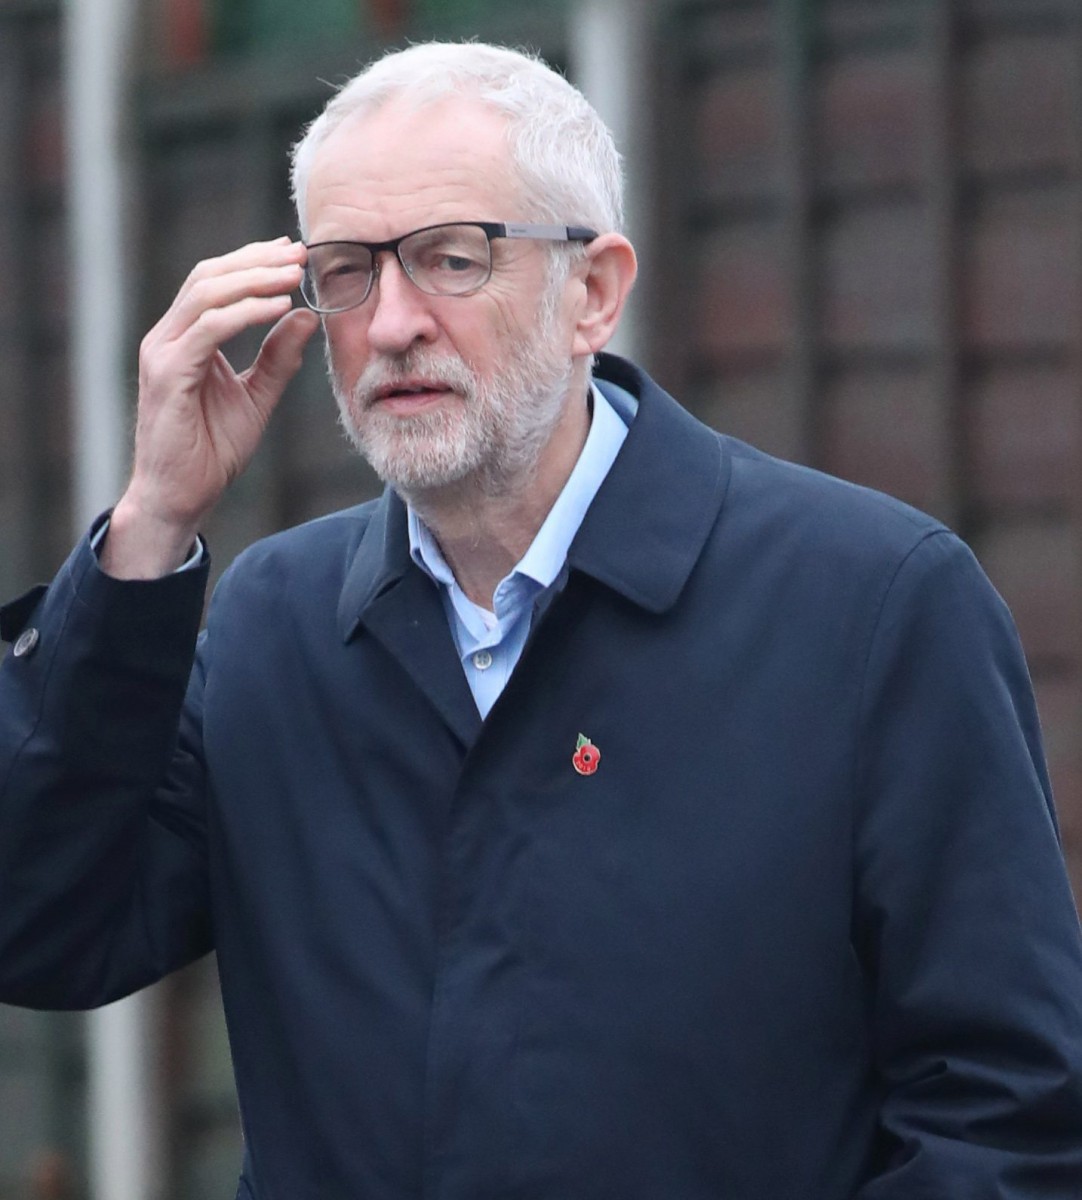 A Jeremy Corbyn victory at the General Election will cost 1.2trillion over the next five years on top of what the government already spends